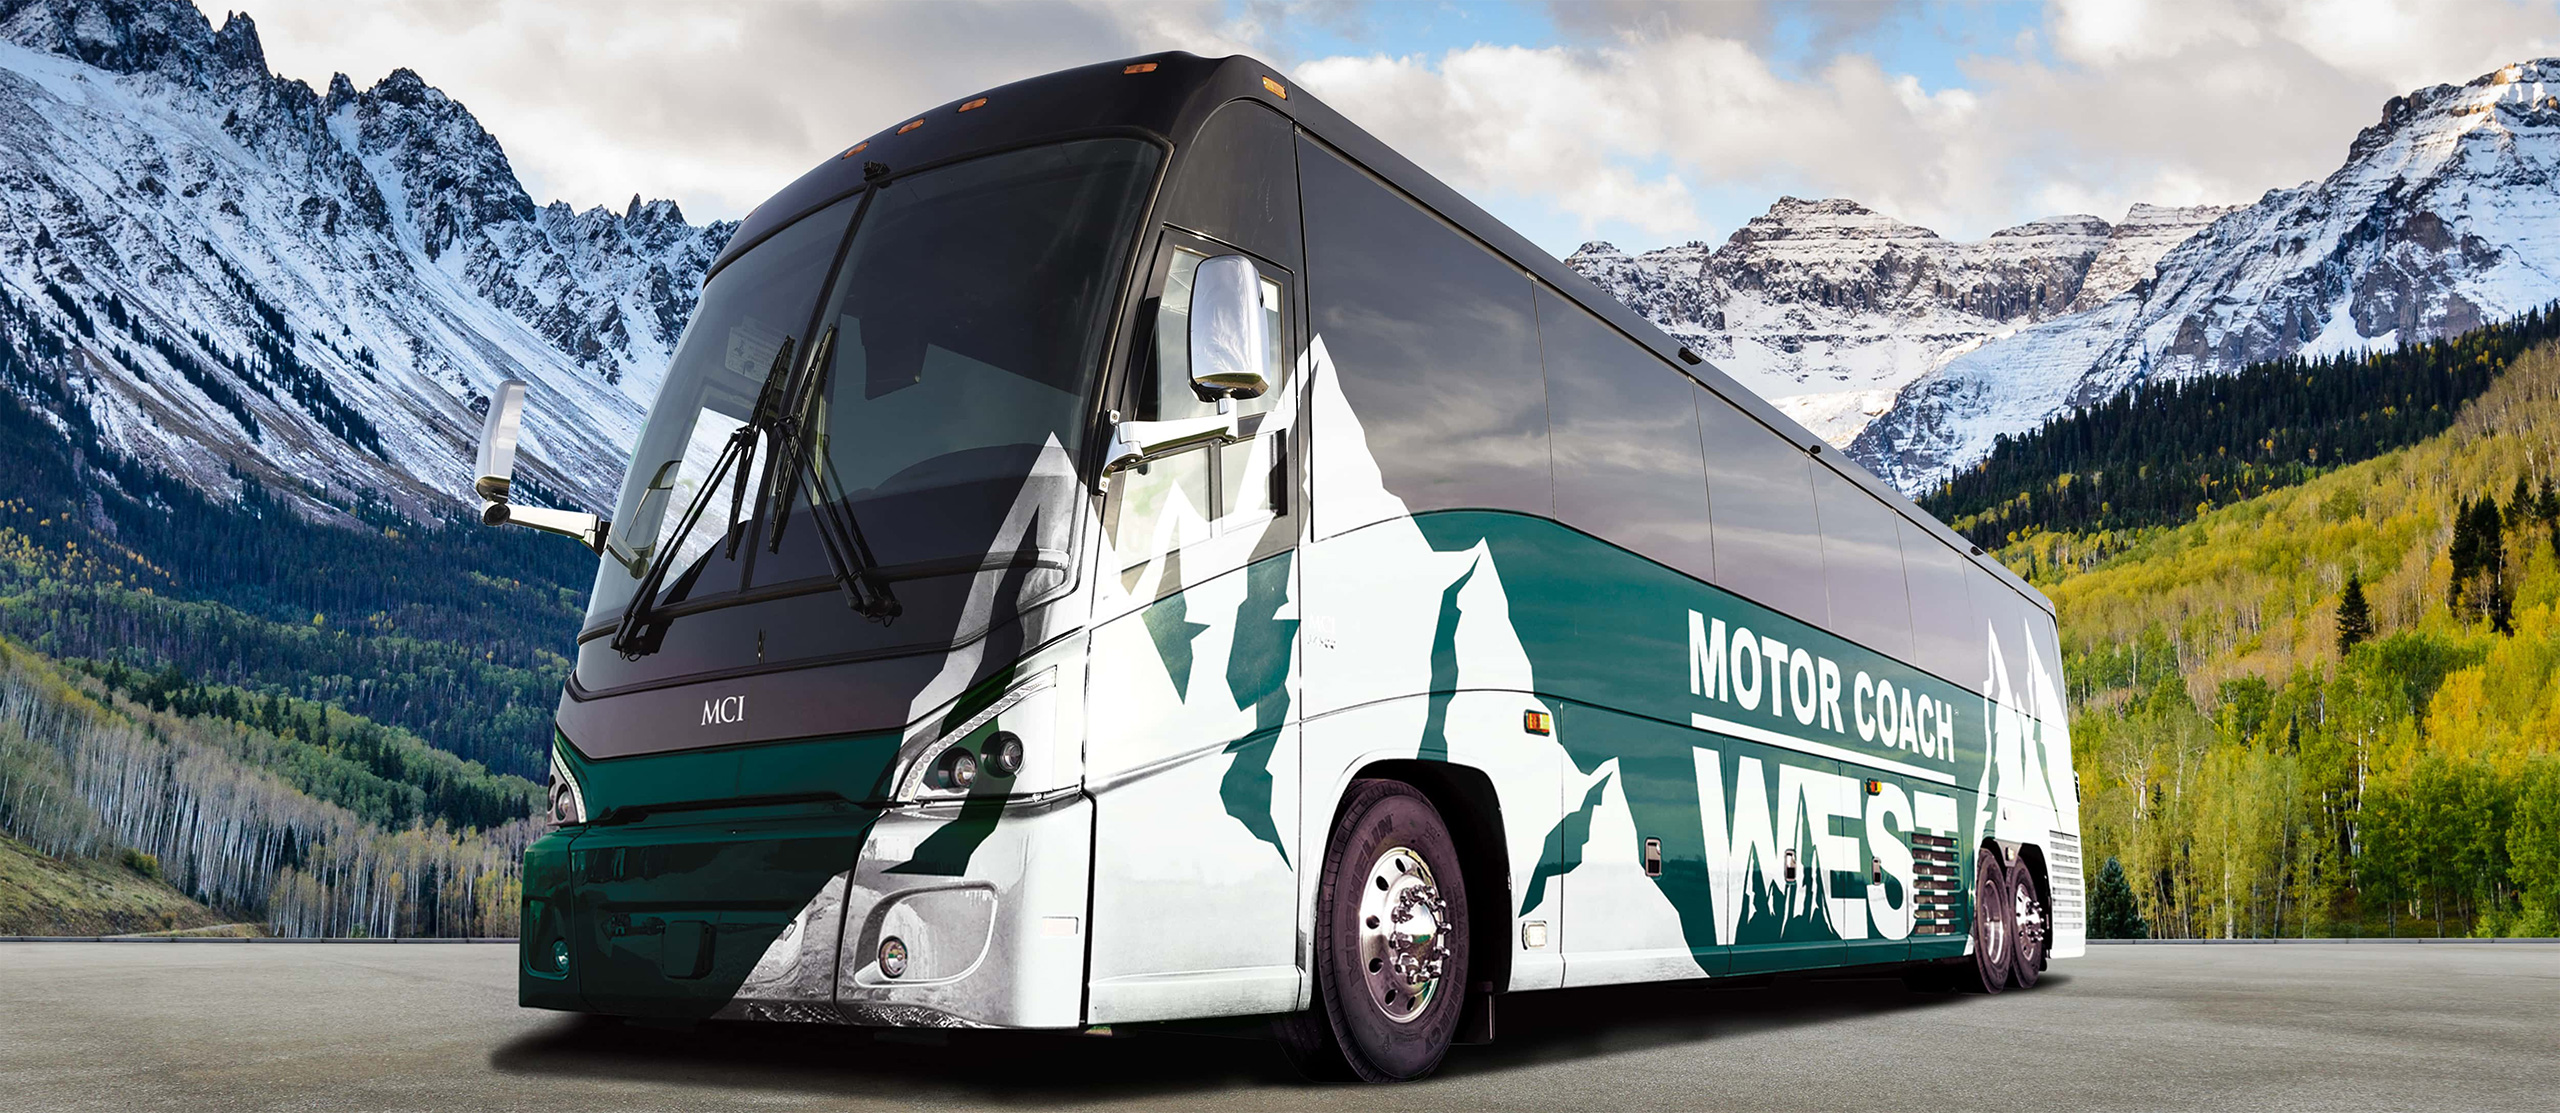 Green Motor Coach West bus against a mountain background